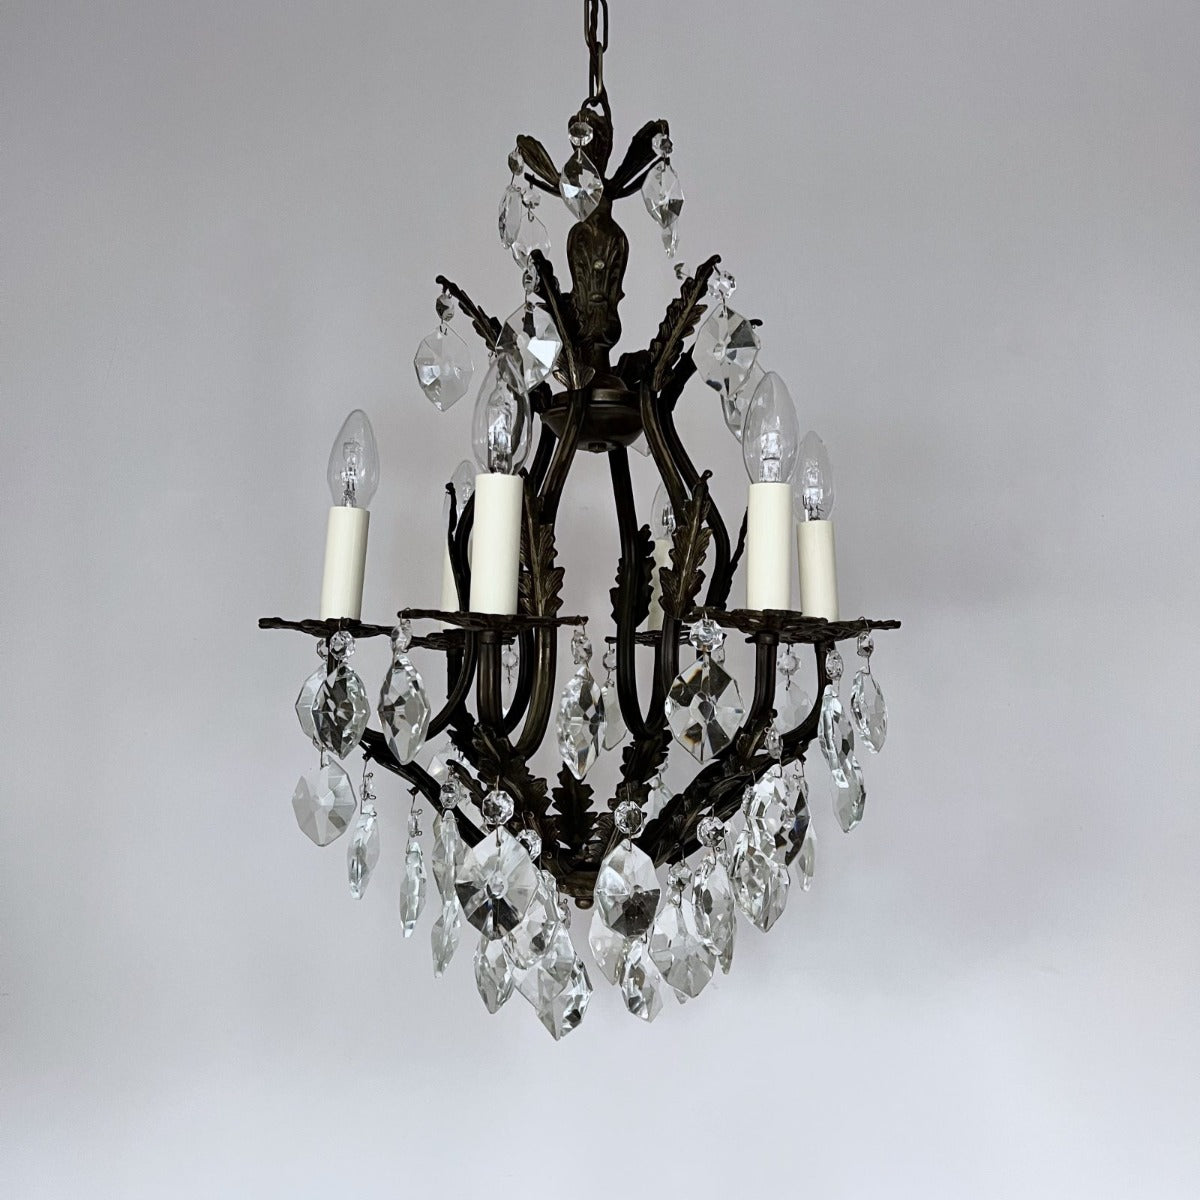 Ornate Italian Antique Birdcage Chandelier with Crystal Iceberg Drops